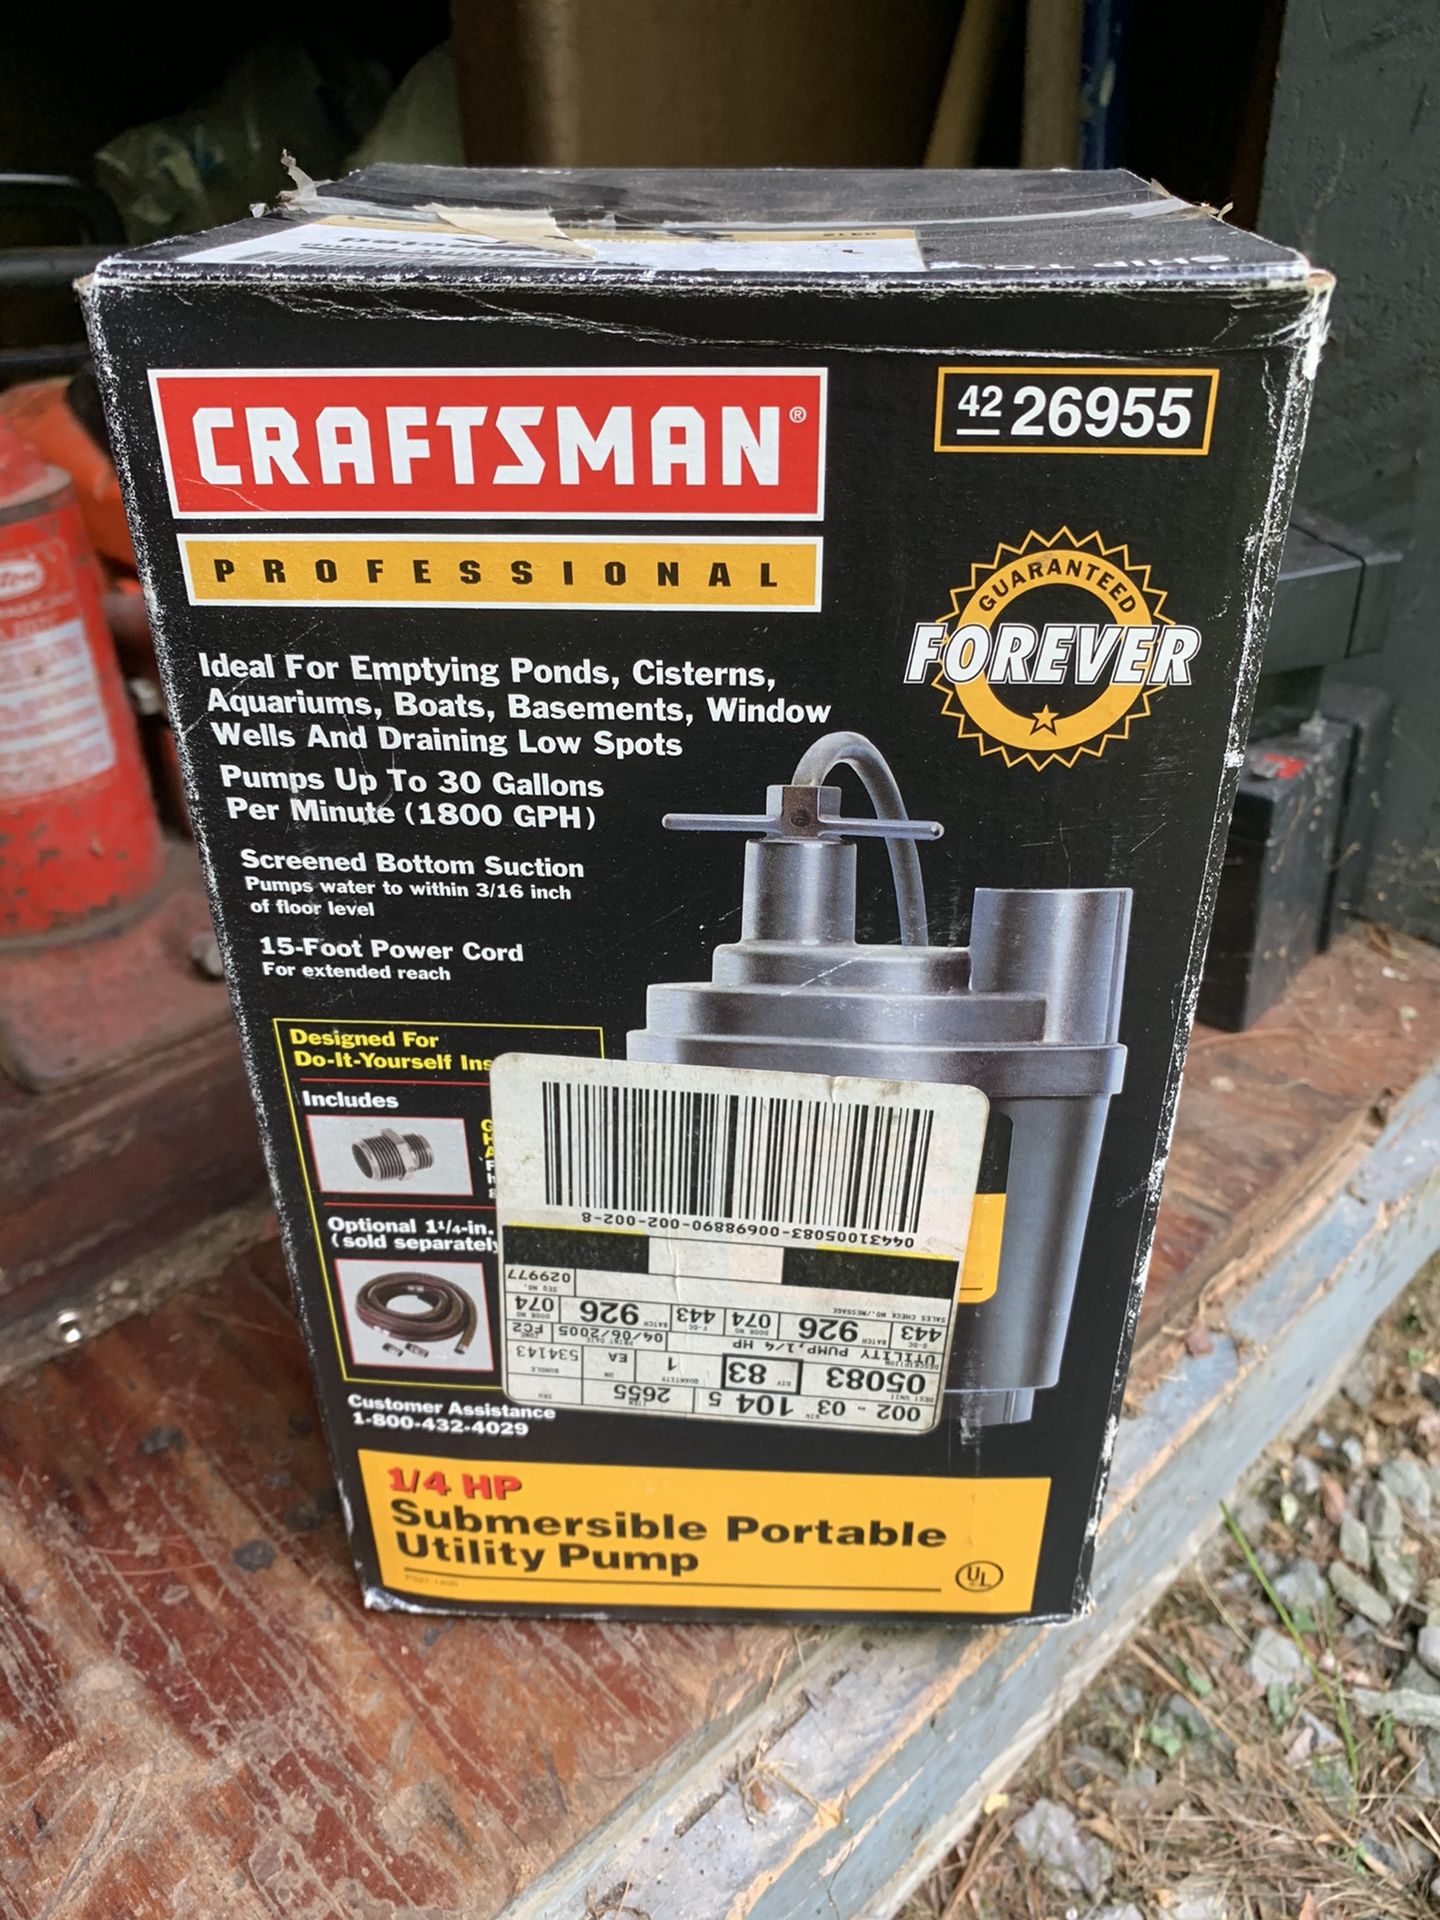 Submersible basement utility pump. Craftsman. New in box